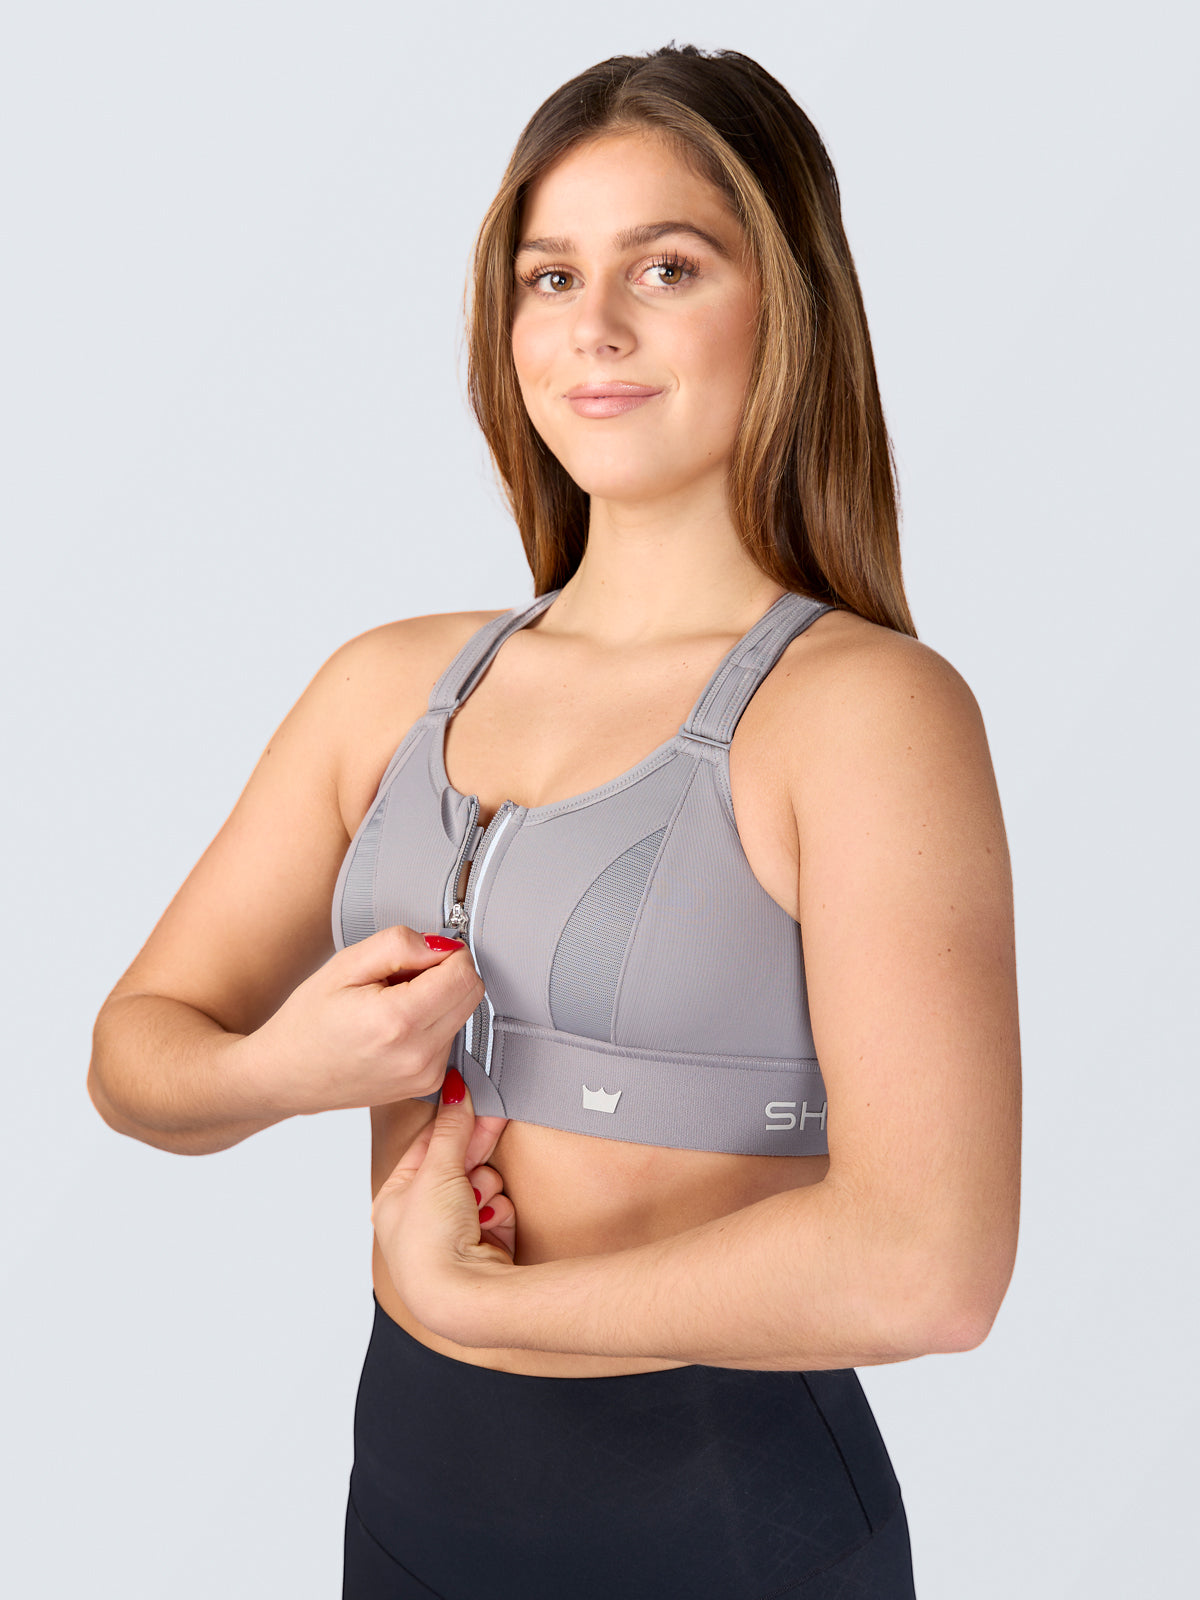 SheFit Ultimate Sports Bra High Impact Pink Size 5Luxe - $35 - From Brooklyn